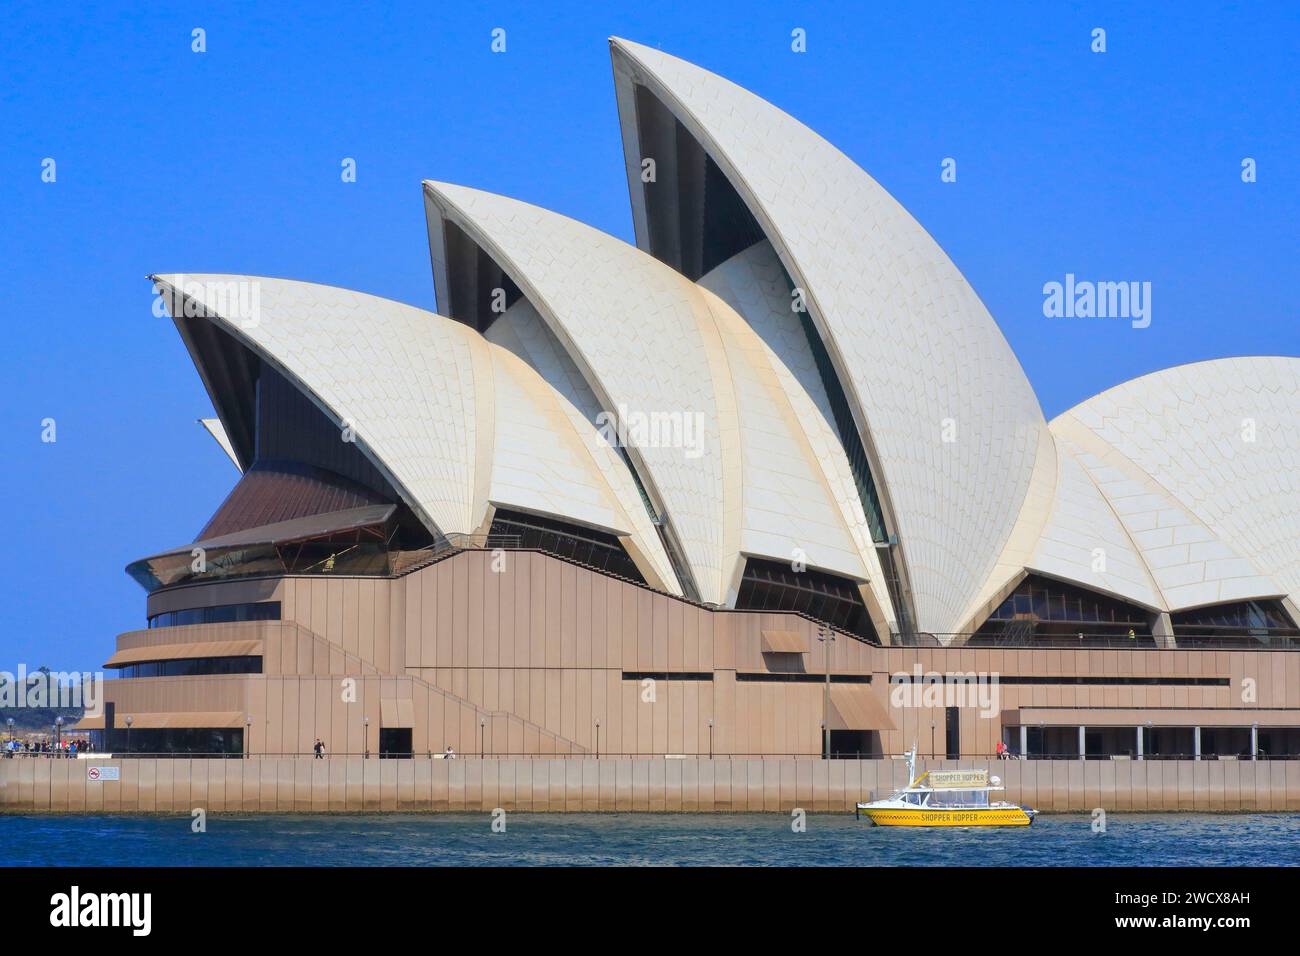 Australia, New South Wales, Sydney, Bennelong Point, boat in front of the Opera House (Sydney Opera House) designed by the Dane Jørn Utzon and inaugurated in 1973 Stock Photo